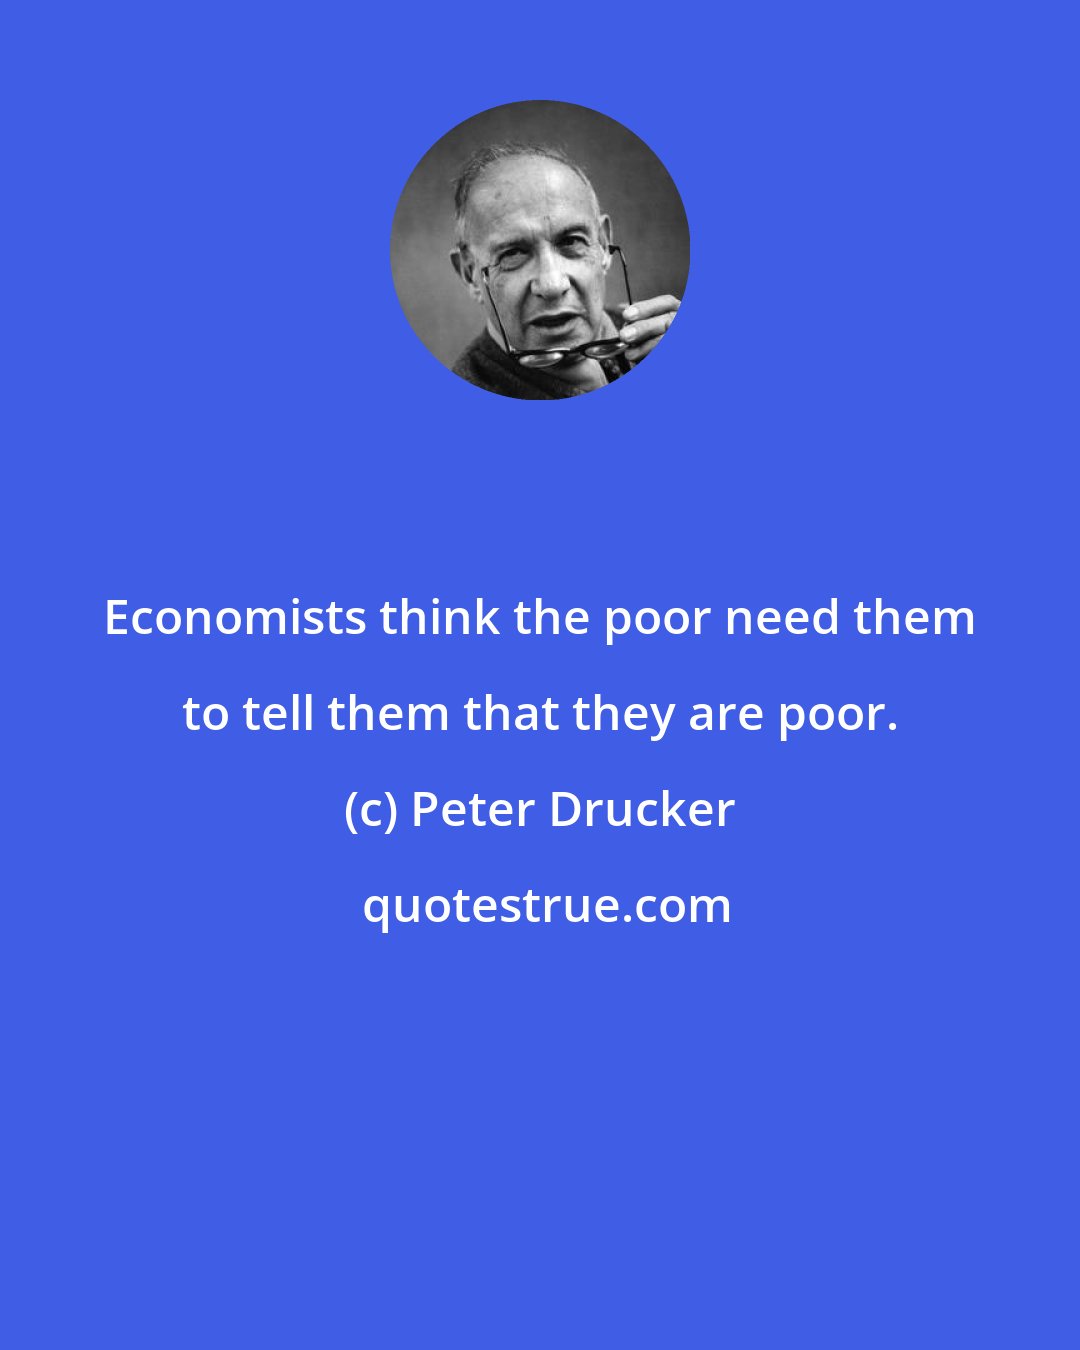 Peter Drucker: Economists think the poor need them to tell them that they are poor.